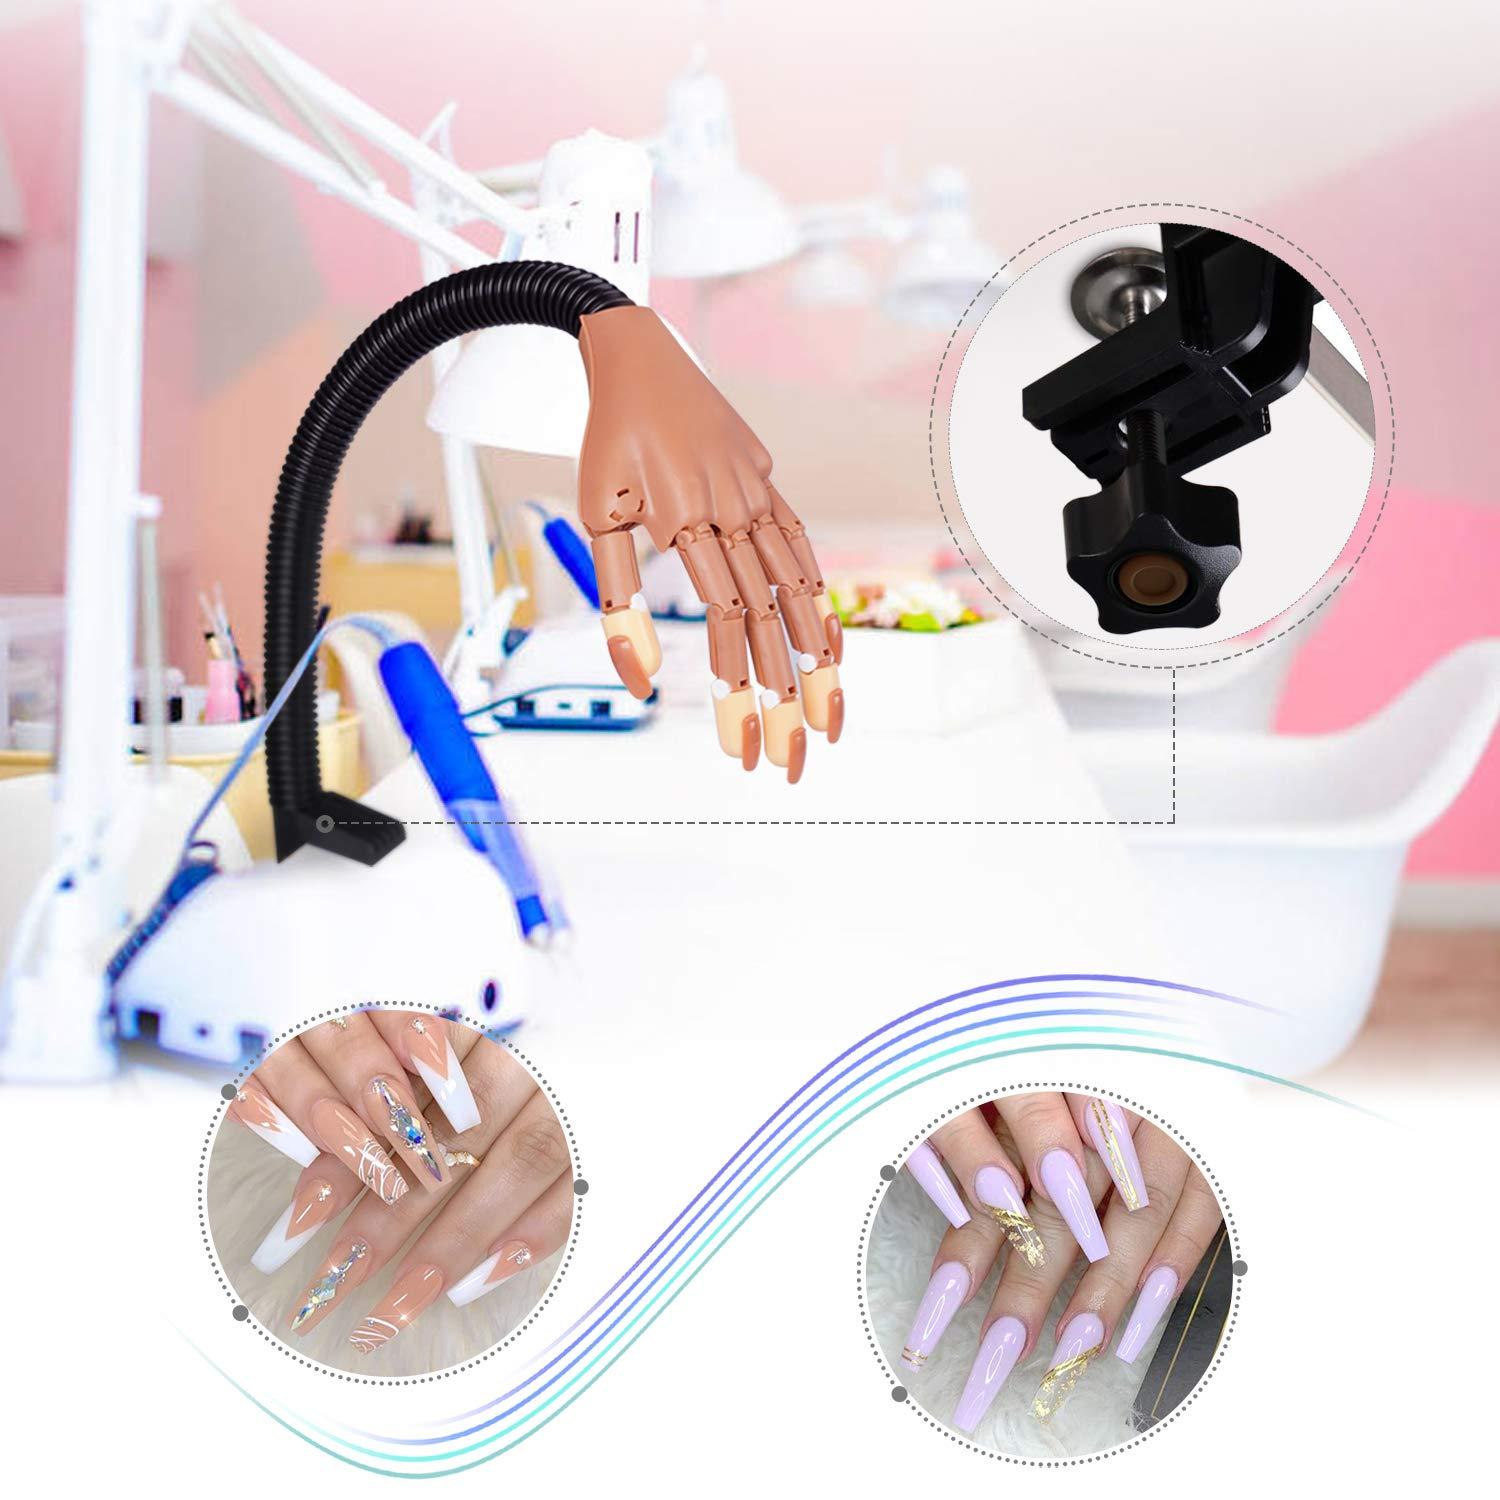 Nail Practice Hand for Acrylic Nails - HoMove Flexible Movable Nail  Training Mannequin Hand Fake Hands to Practice Nail - Best DIY Manicure  Starter